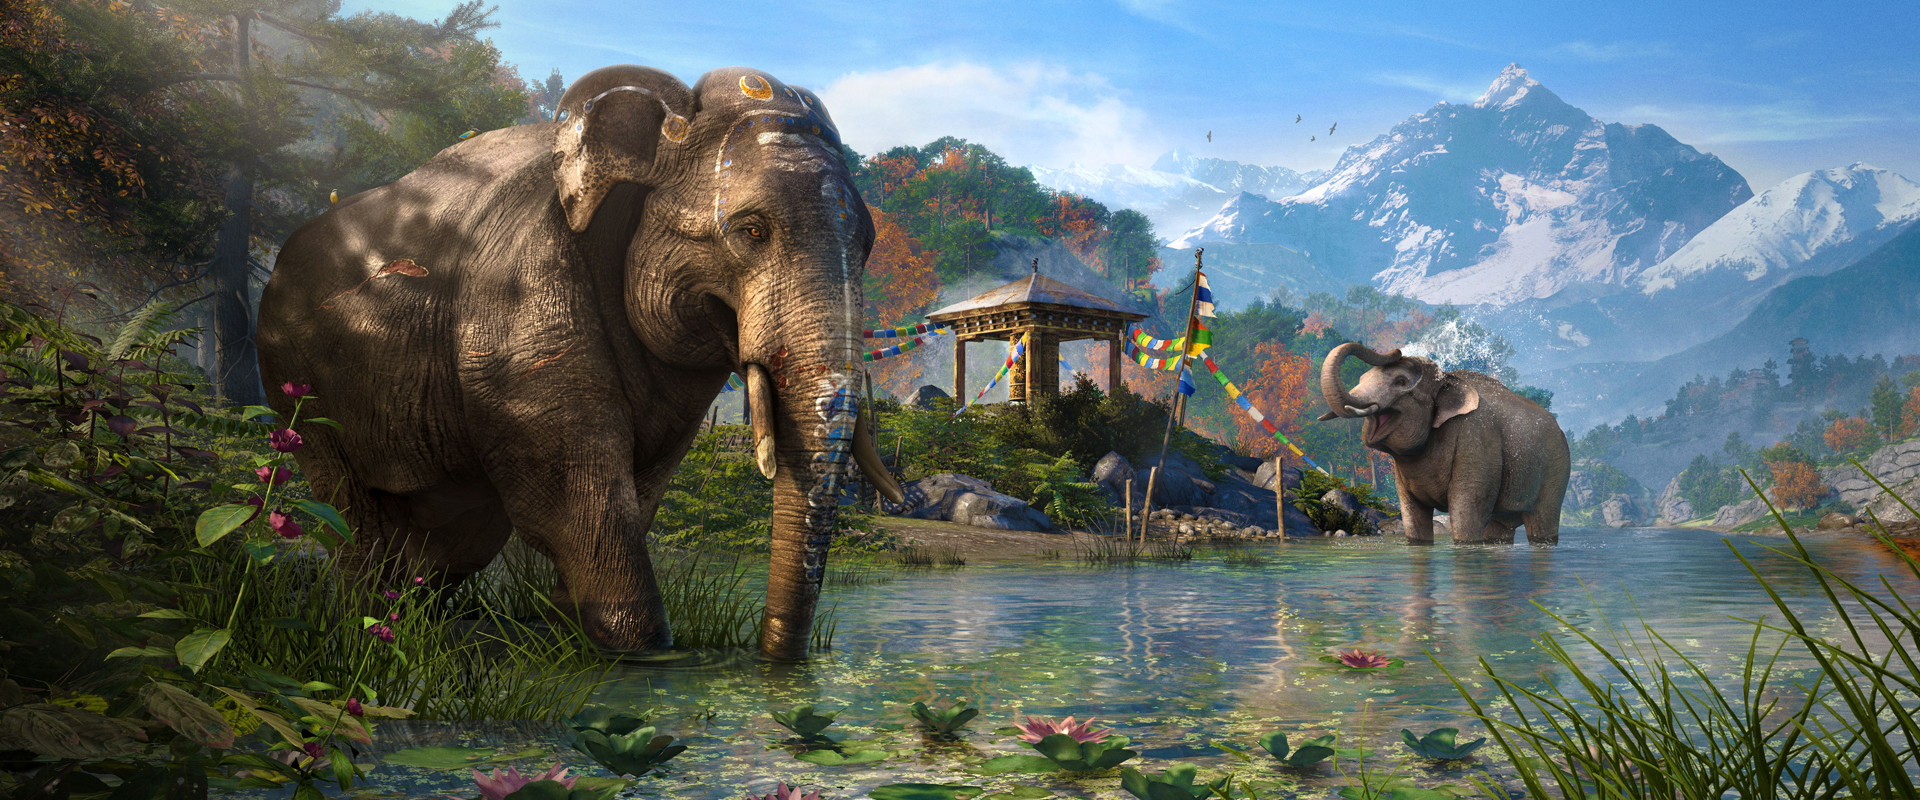 Far Cry 4 Review It S Deja Vu All Over Again And I Love It Ars Technica